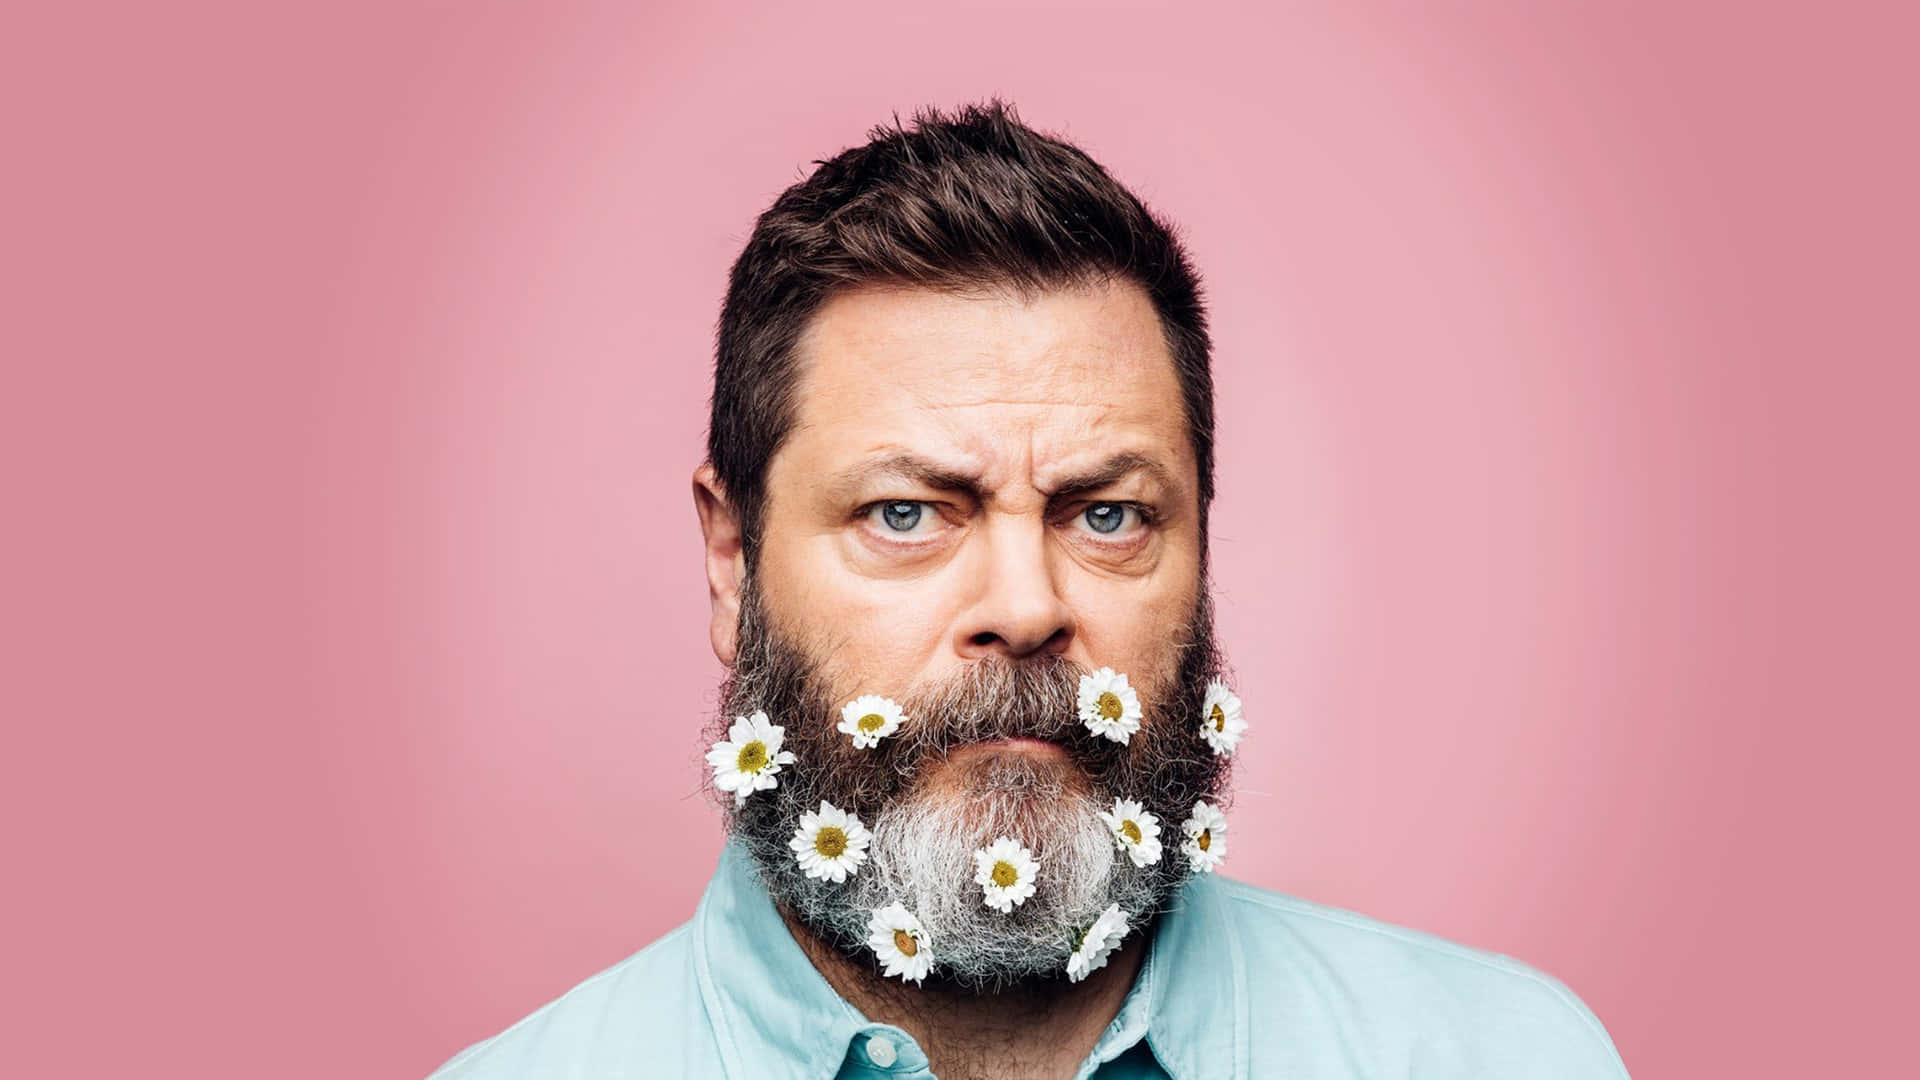 Nick Offerman - Actor And Actor Background